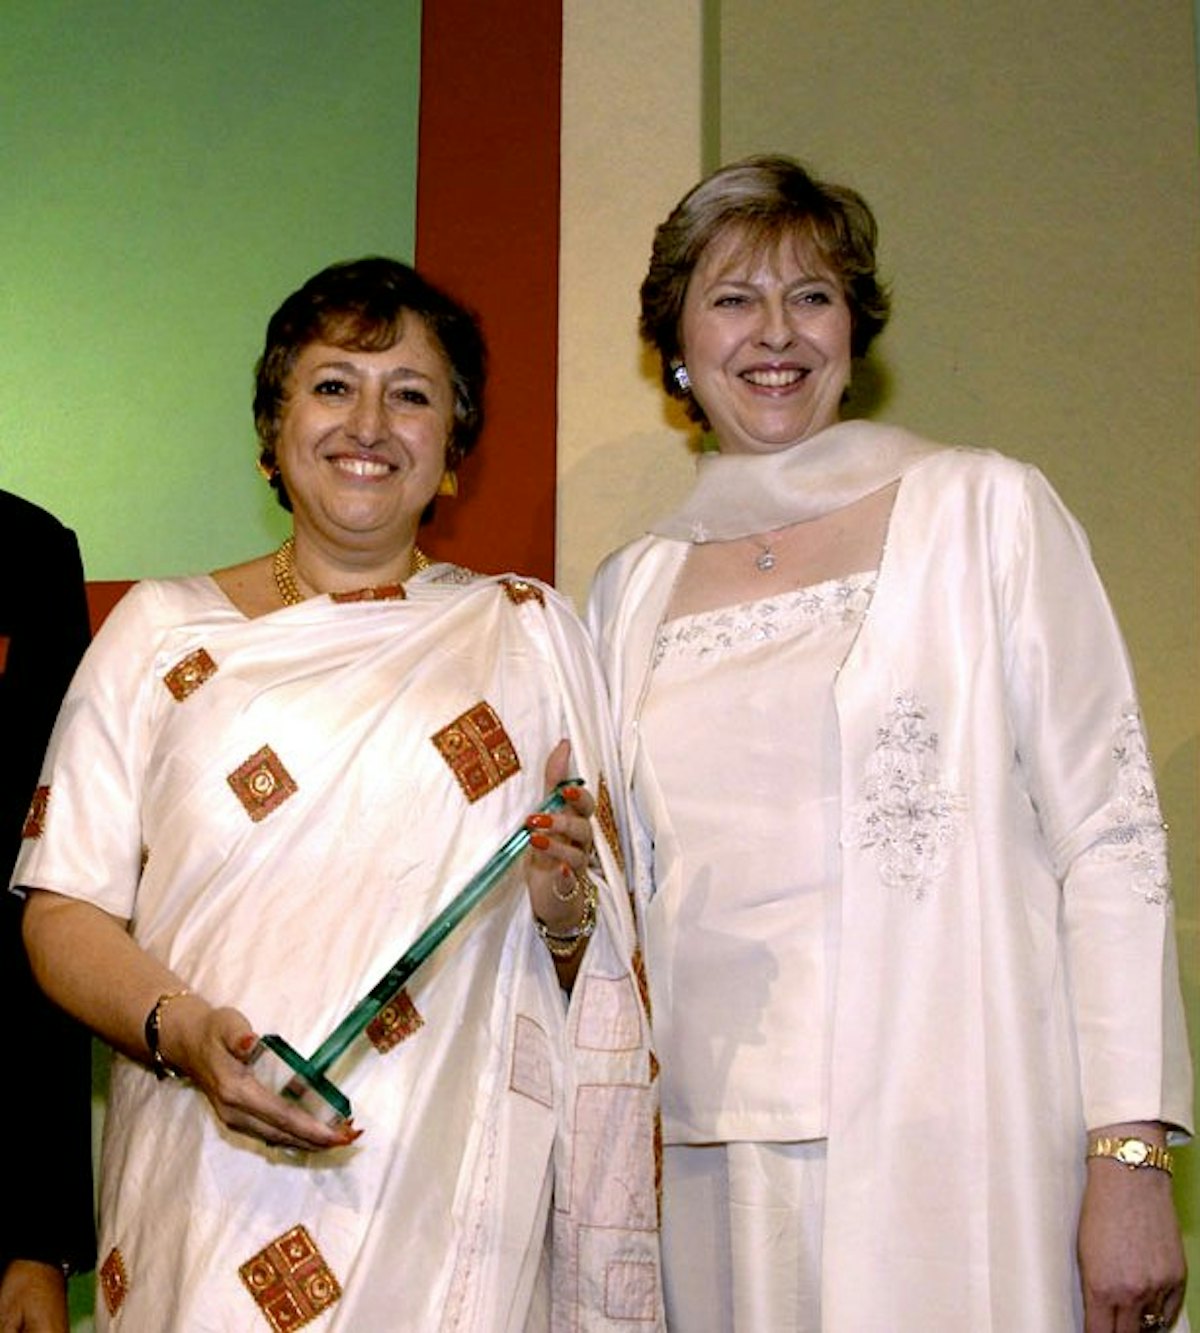 Member of the Parliament Theresa May (right), who presented the "Business Woman of the Year" award at the Asian Women of Achievement Awards ceremony, 2005, to Jyoti Munsiff. Photo courtesy of Asian Women of Achievement Awards.